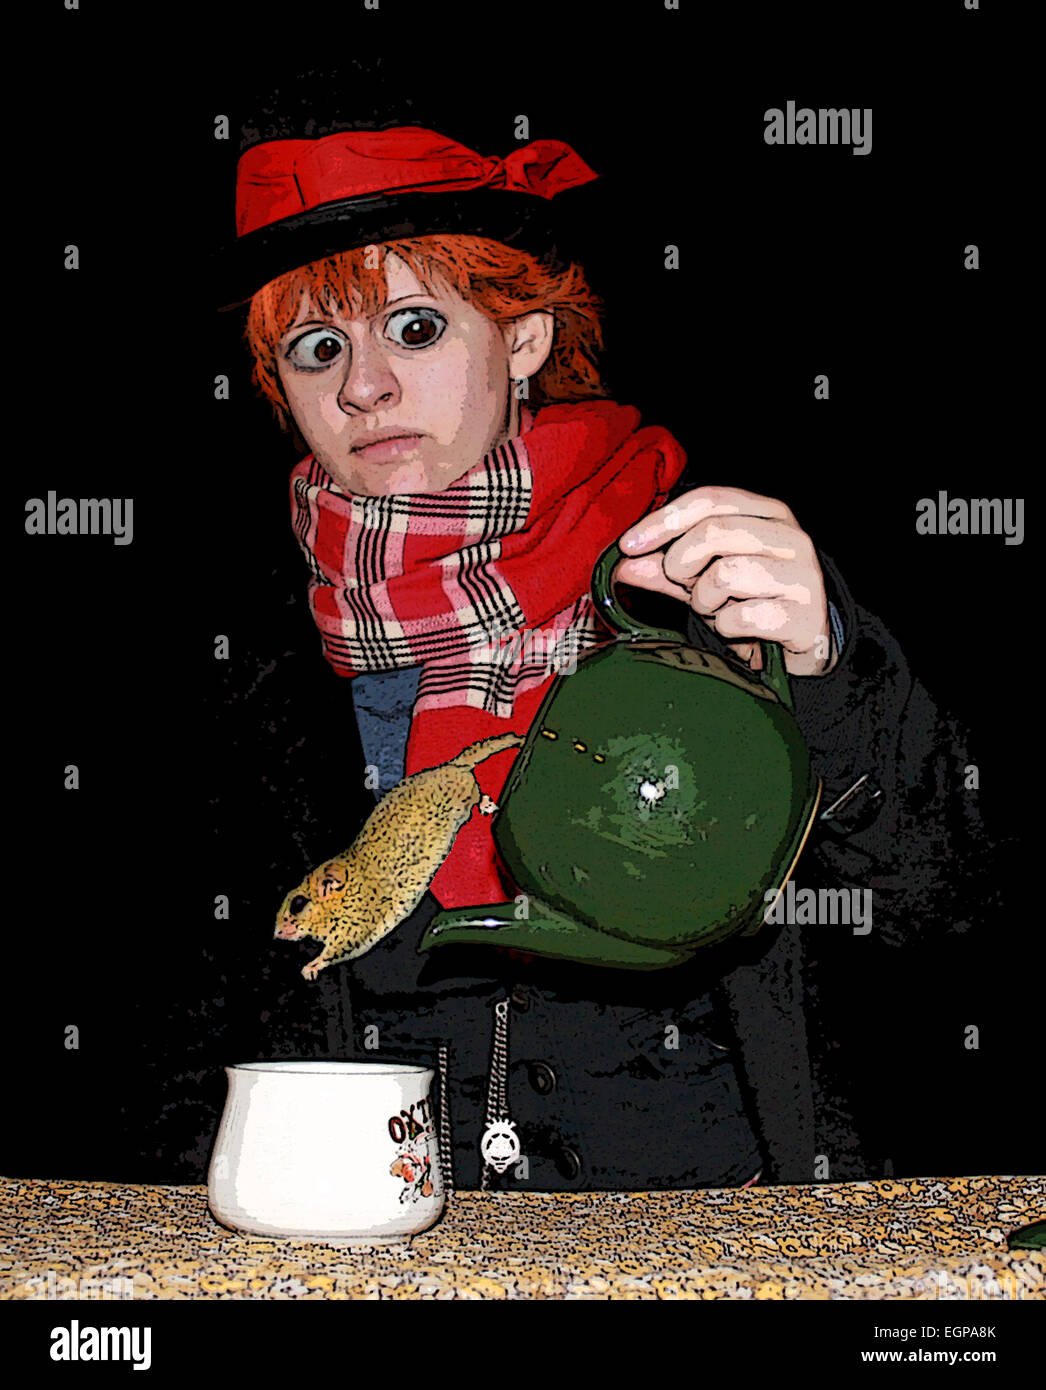 mad hatter, mouse, mad hatter's tea party, fairytale, fiction, fictional, story book, photography, artistic, Stock Photo